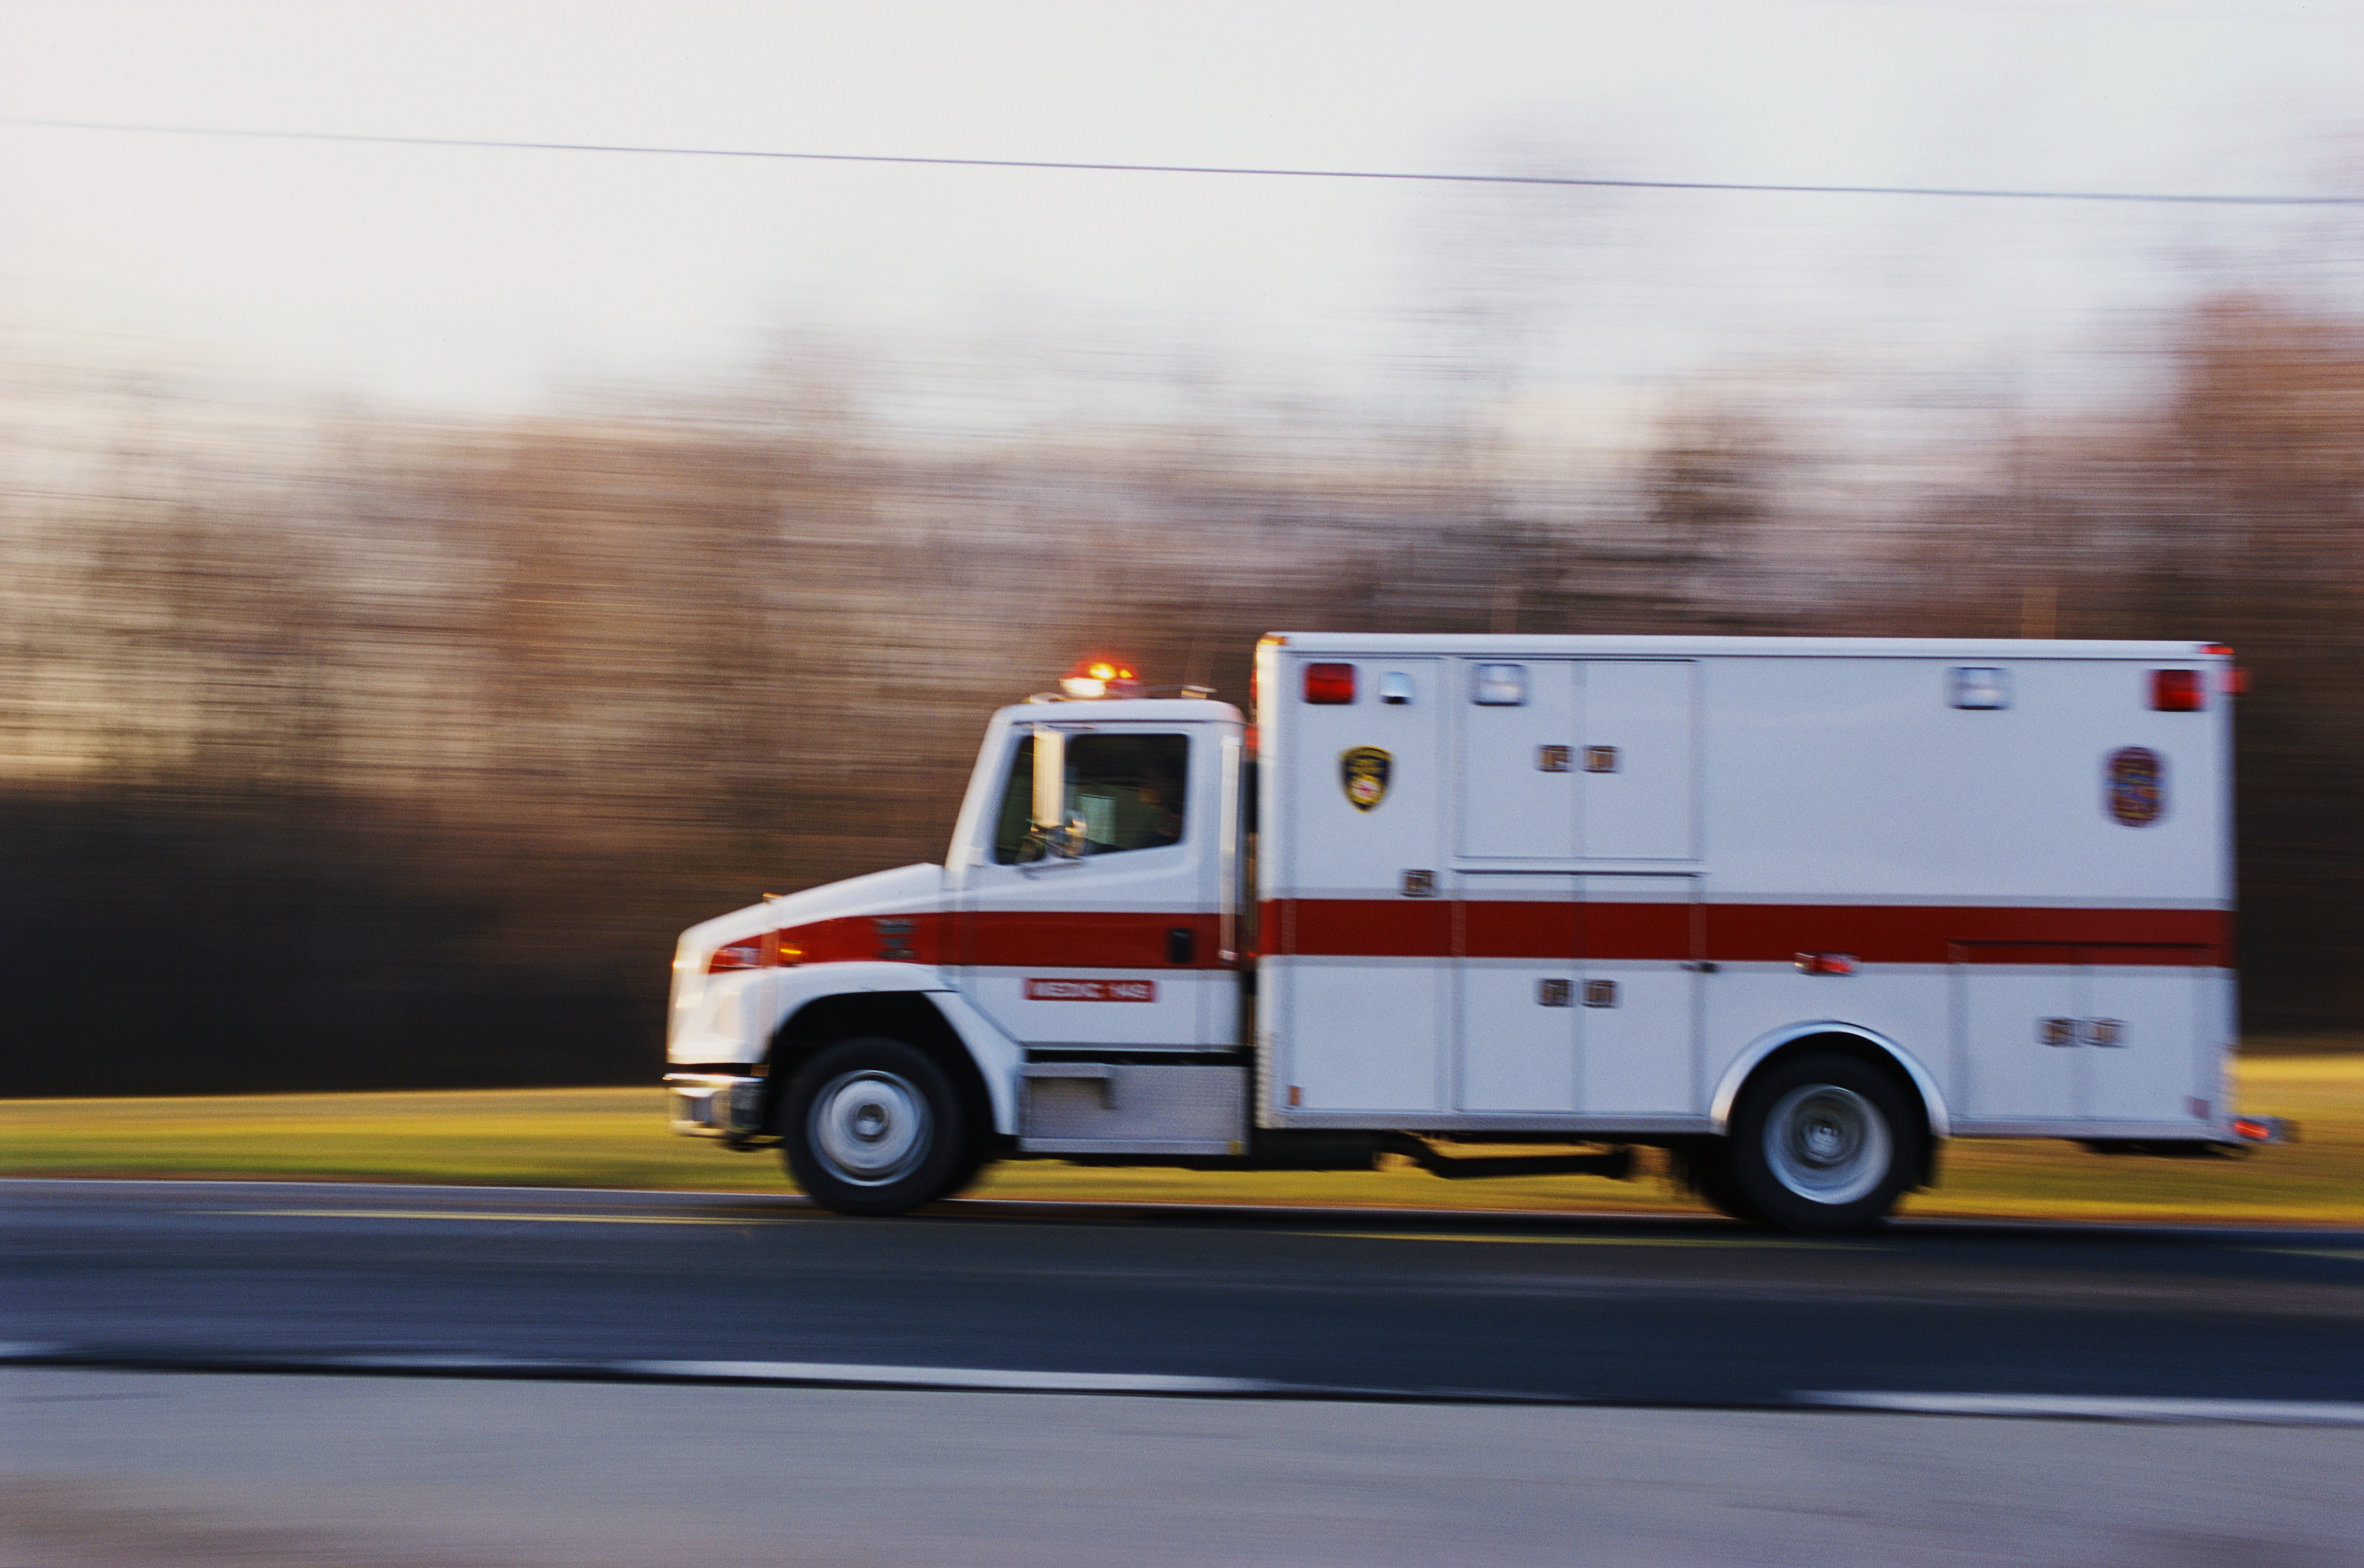 An ambulance on the road